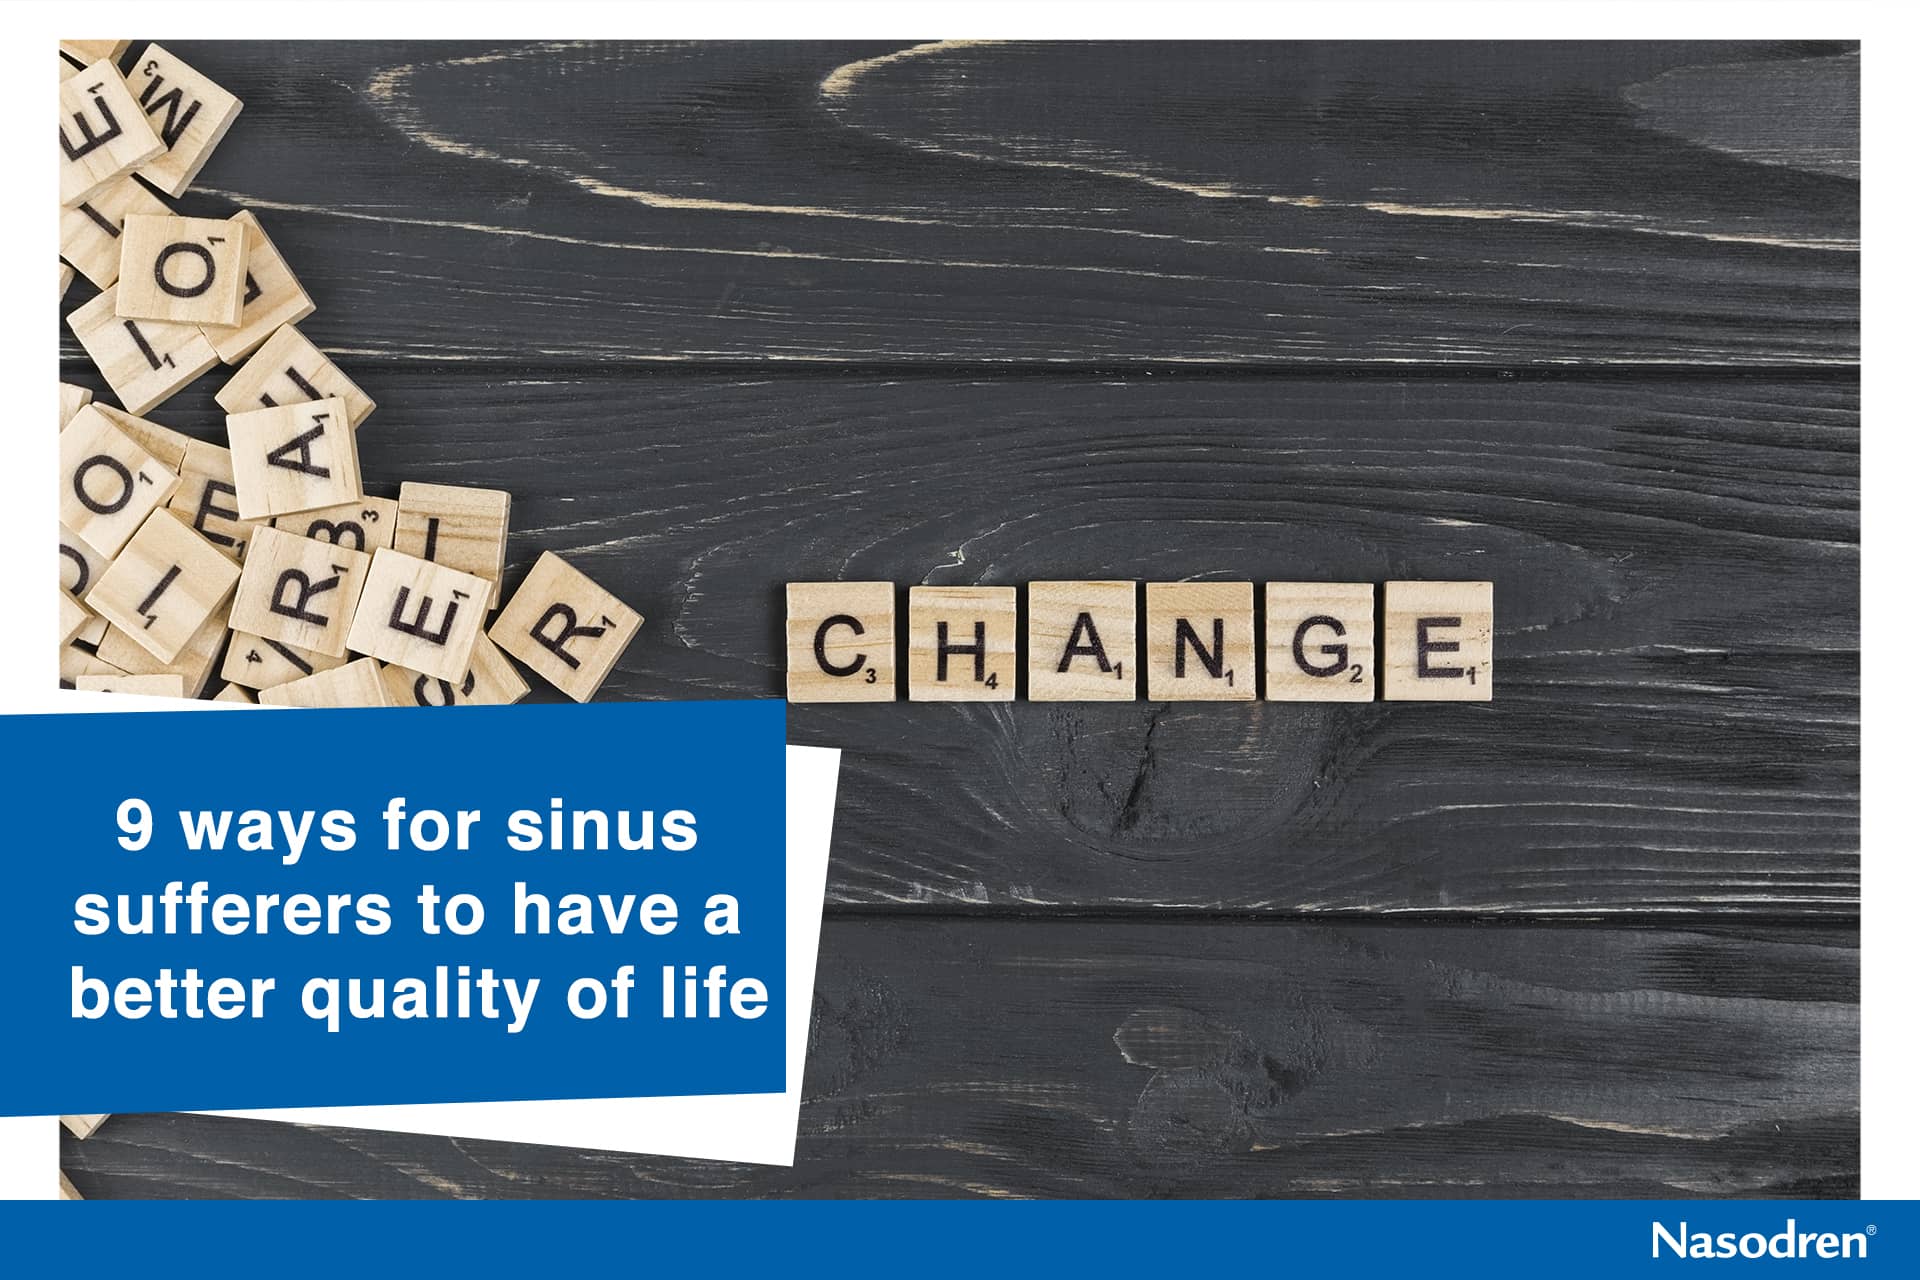 9 ways for sinus sufferers to have a better quality of life